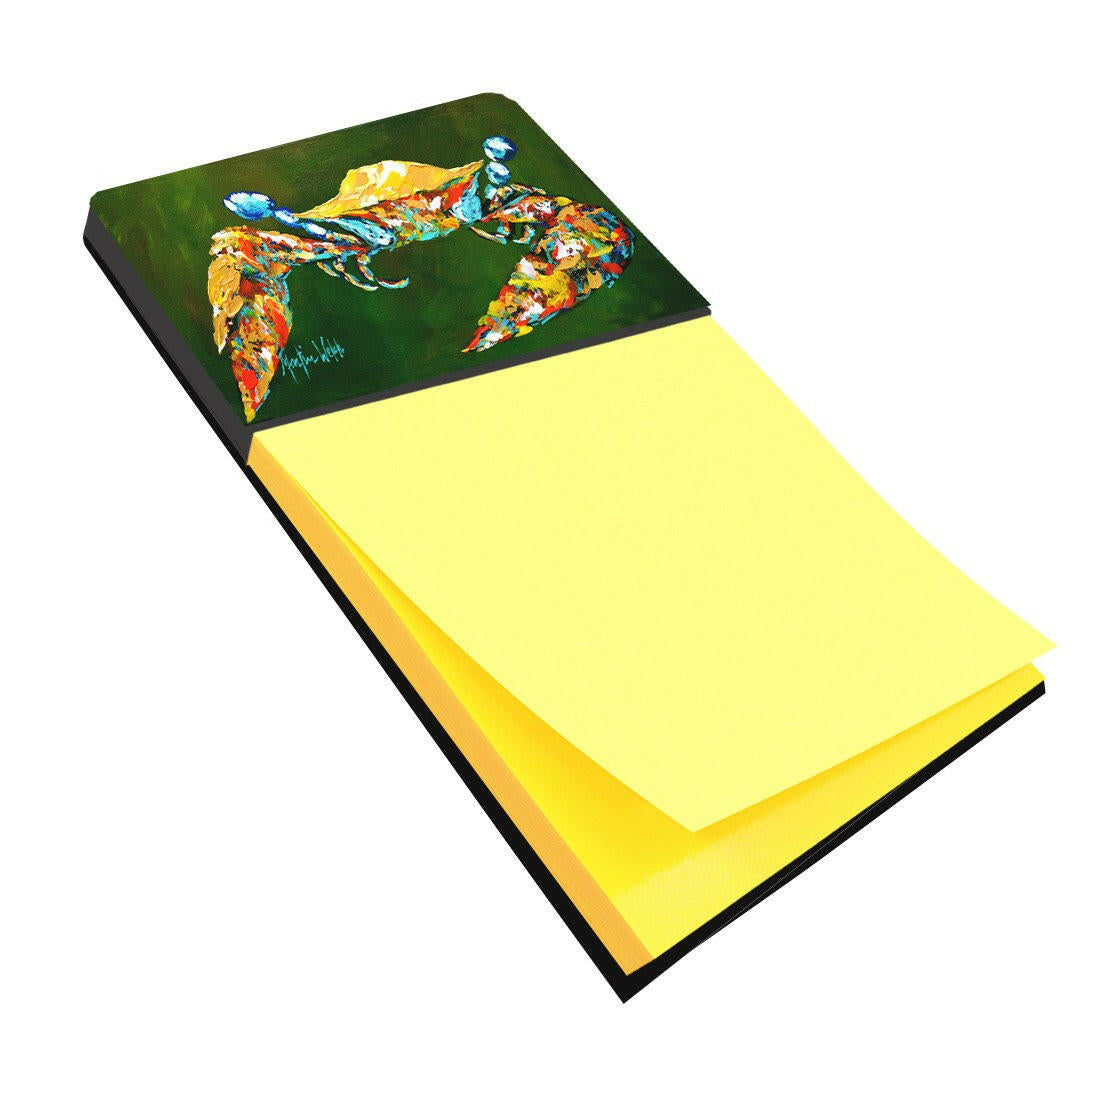 Go Green Crab Refiillable Sticky Note Holder or Postit Note Dispenser MW1157SN by Caroline's Treasures